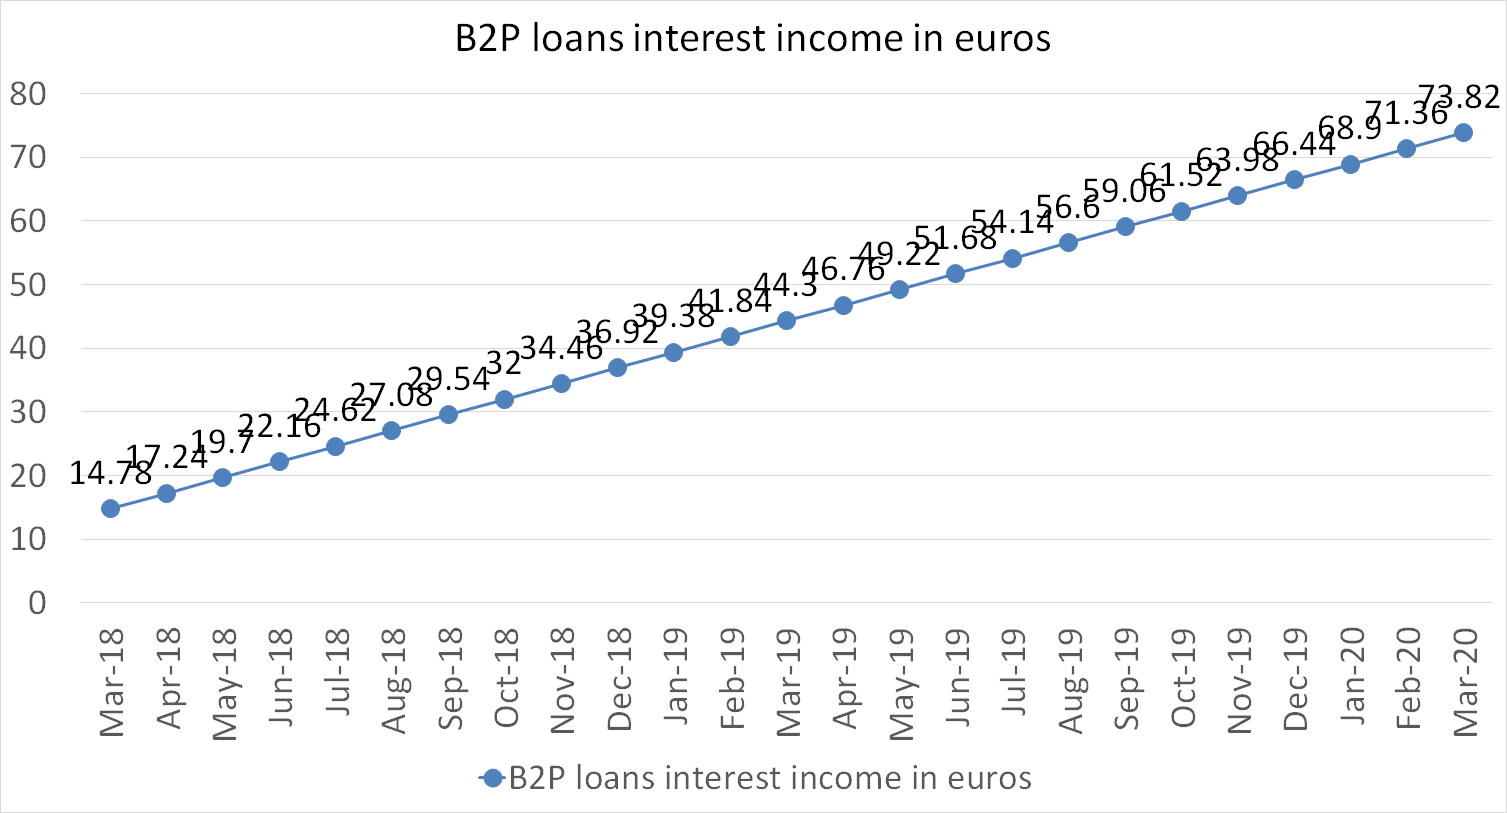 B2P loans interest income in euros in march 2020